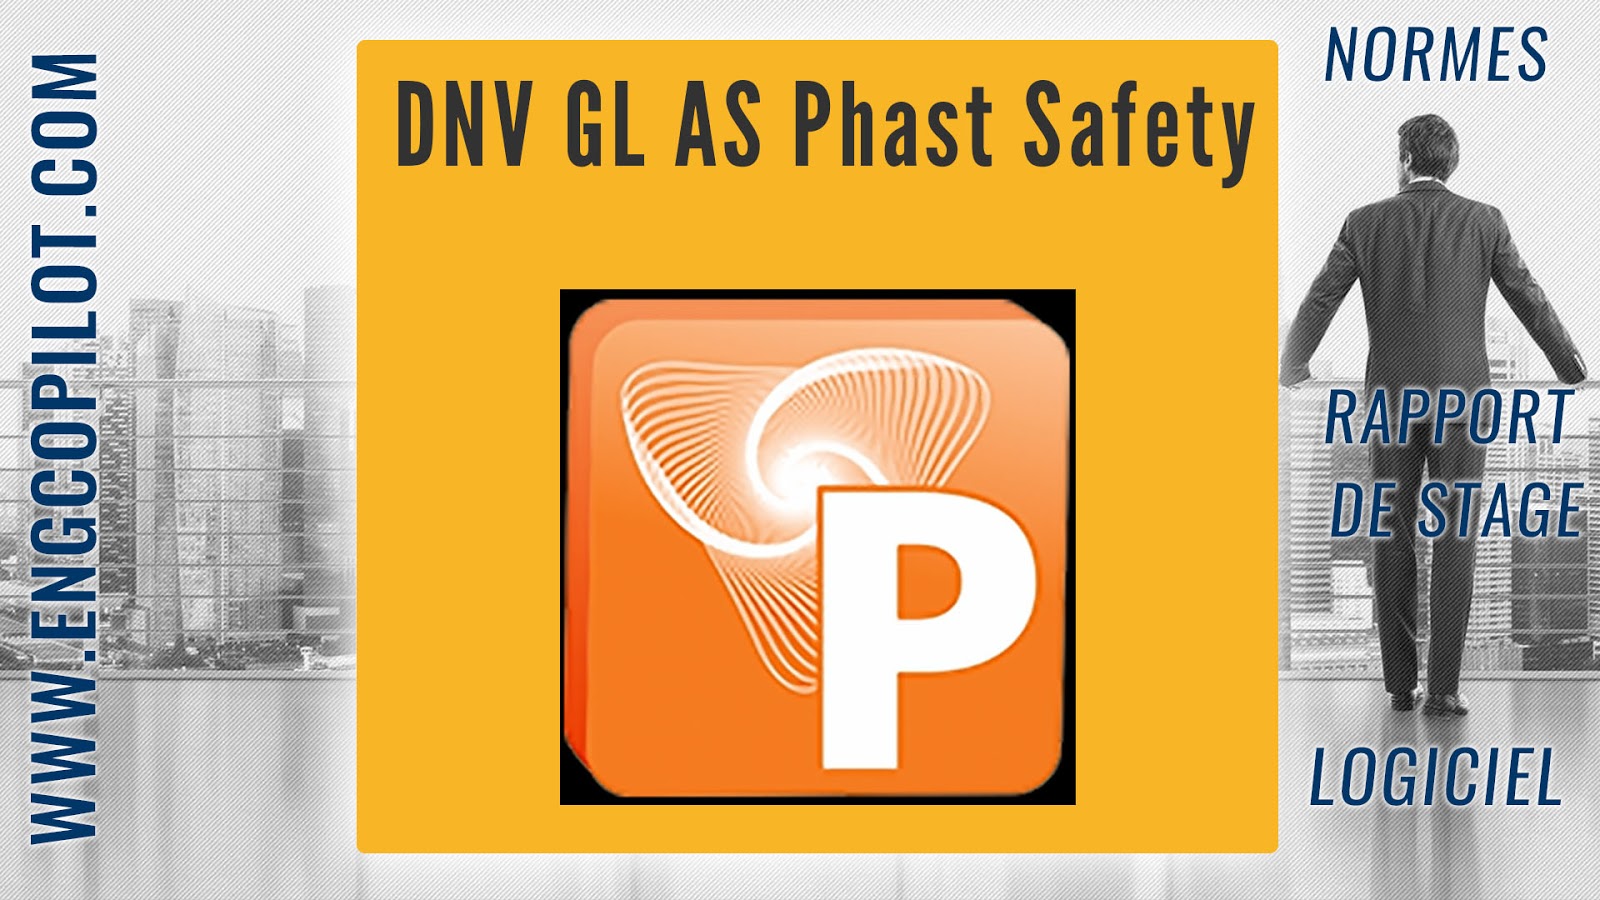 cost of phast software dnv gl